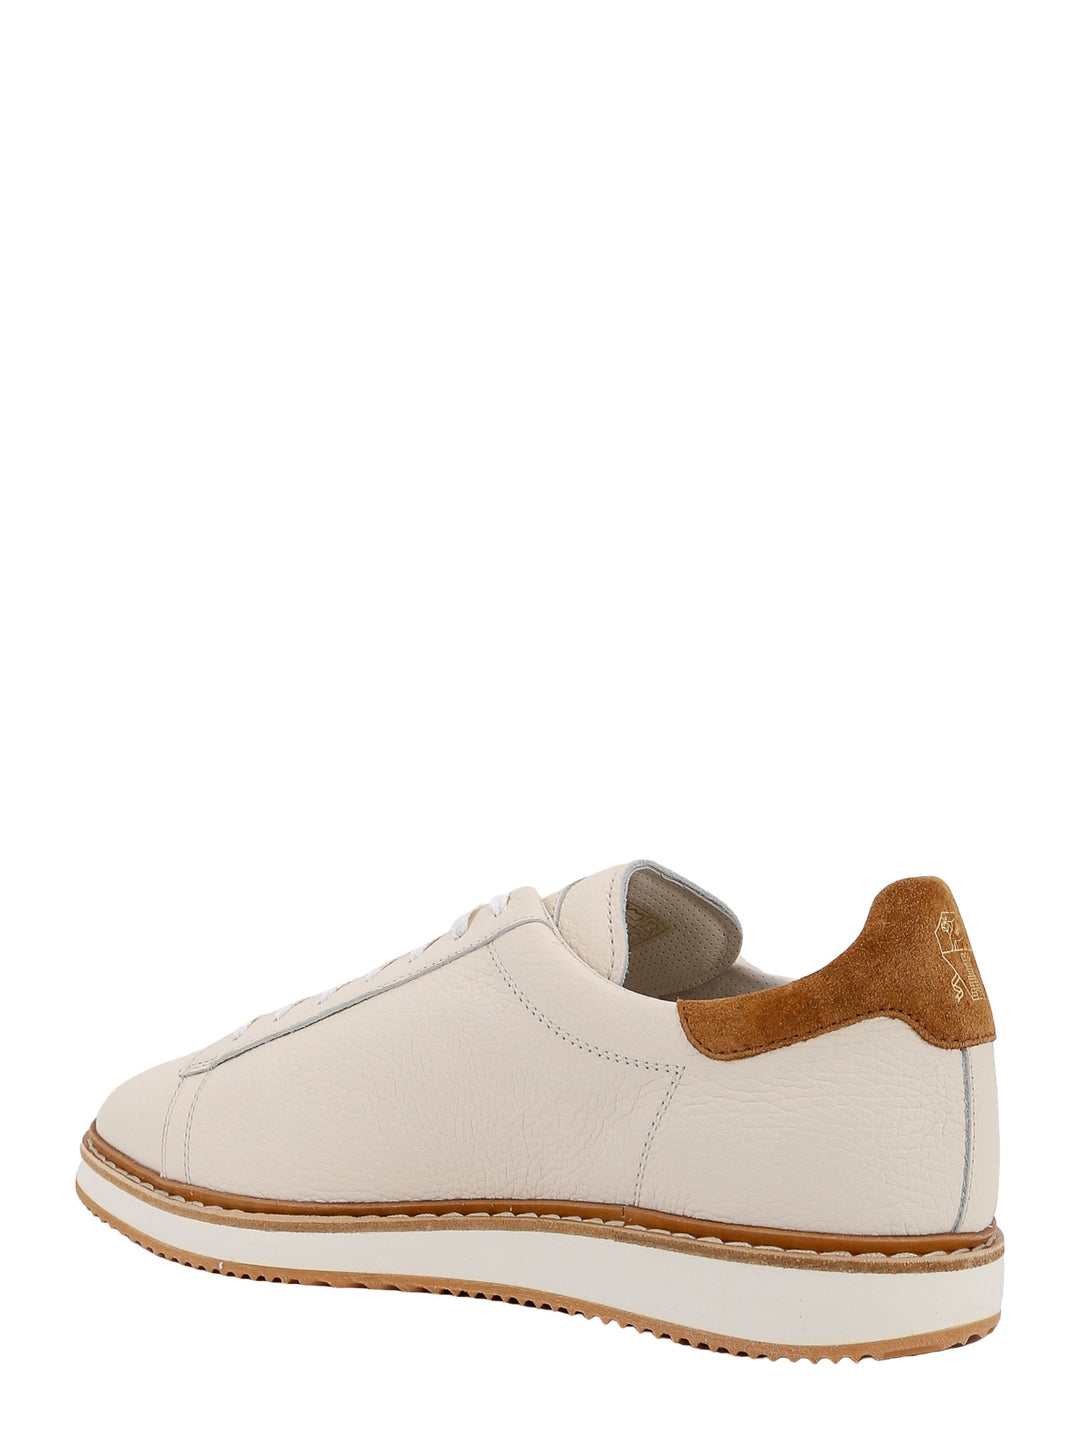 Sneakers in pelle con stampa logo